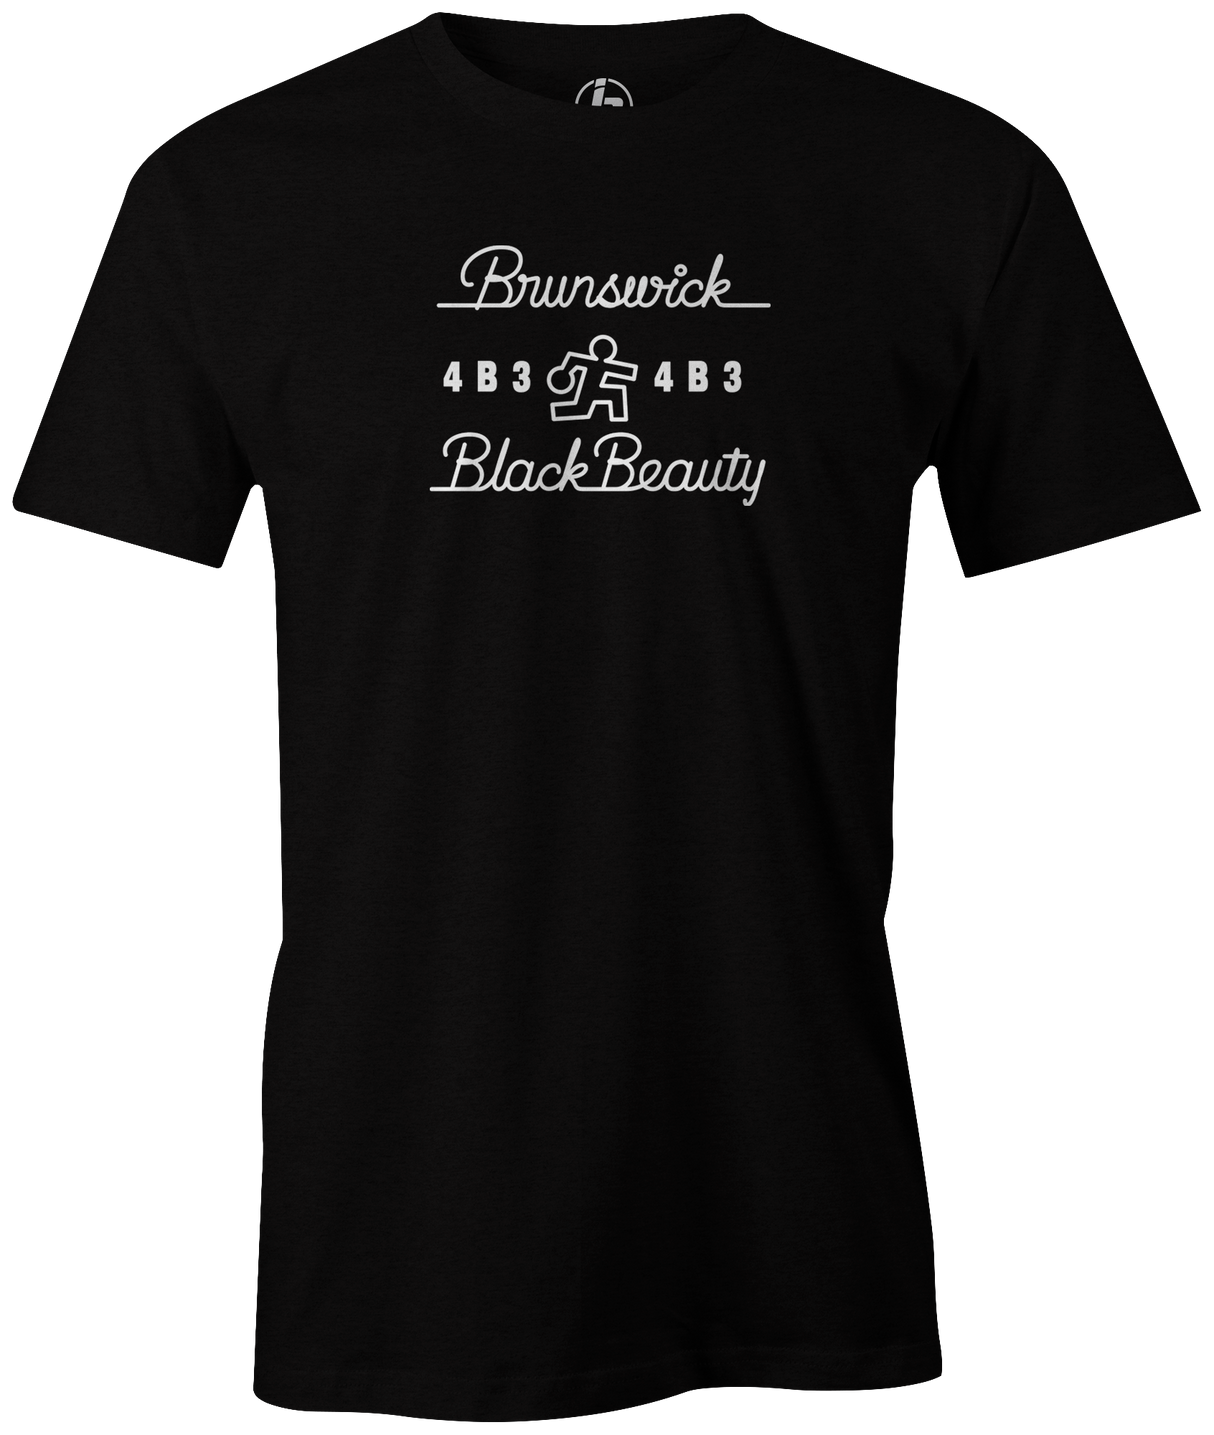 She was a Beauty and still can be with the retro Brunswick Black Beauty Bowling T-shirt. Available in Black and Charcoal. Remember to take out your frustration on the pins, and not your teammates. Bowling shirts from Inside Bowling. Tee shirt t-shirt tees shirts novelty league tournament comfortable apparel. Sale, gift, discounted, best.